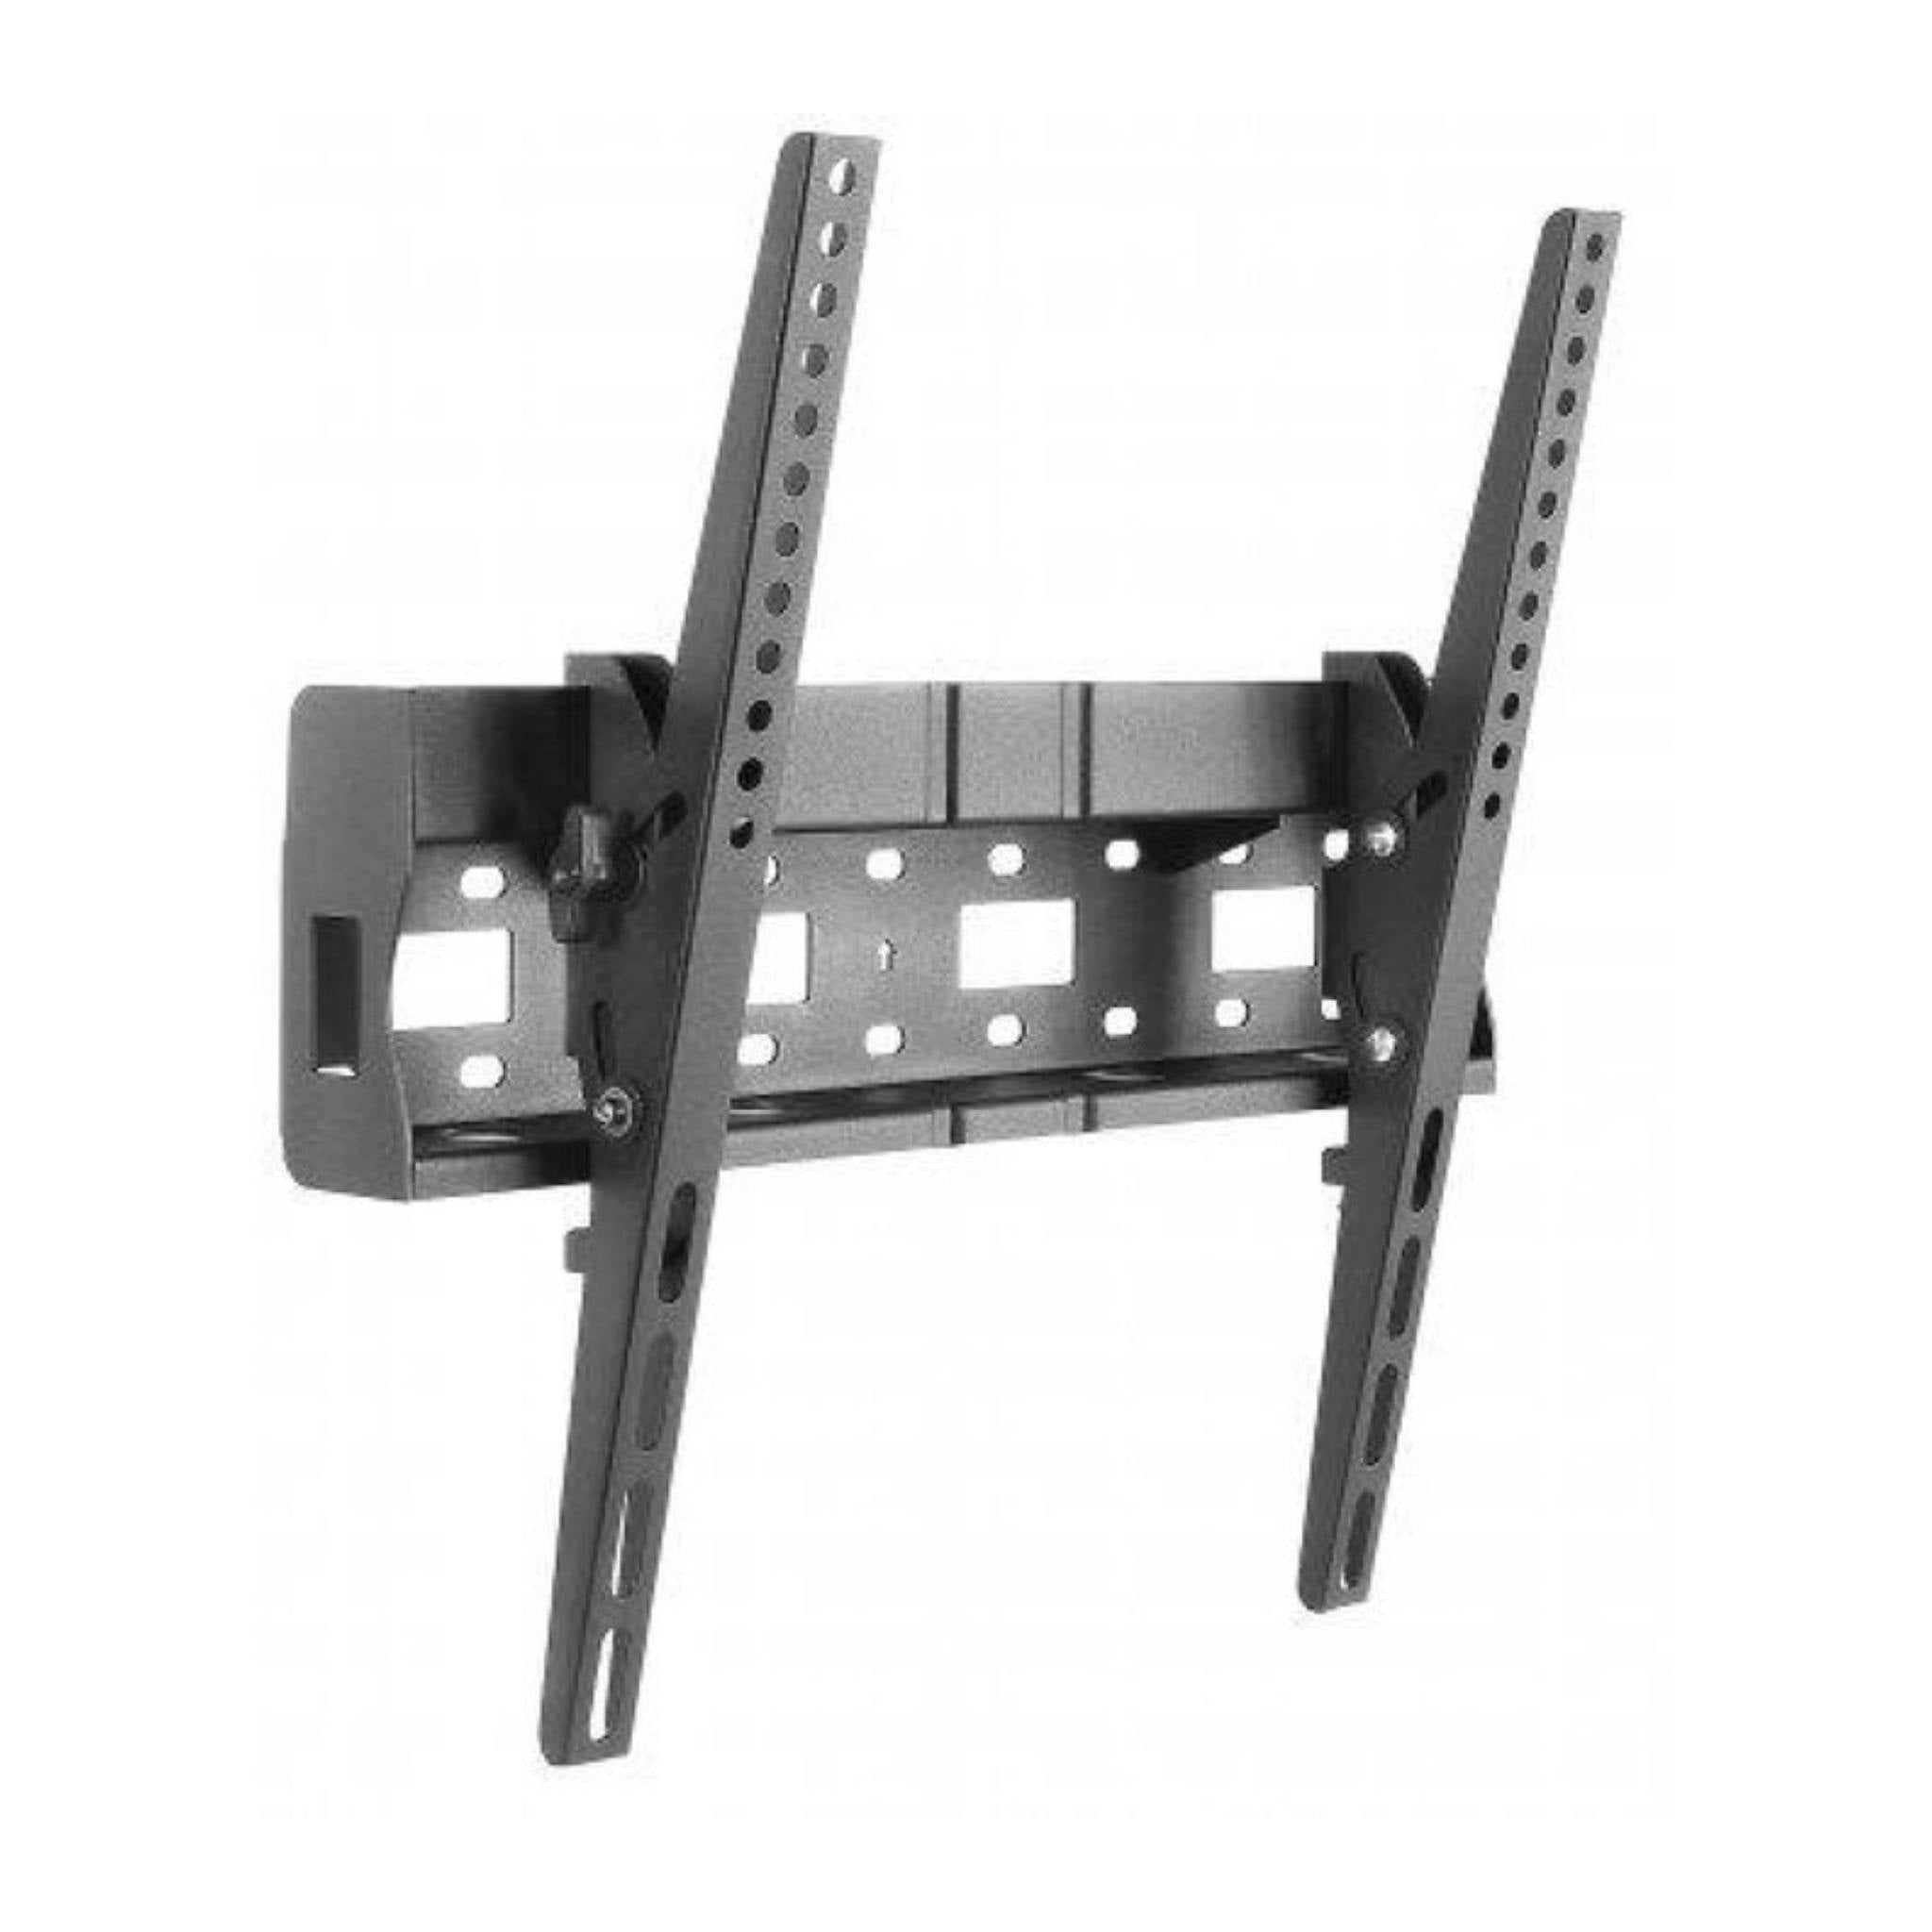 Manhattan Universal Flat-Panel TV Tilting Wall Mount with Integrated Storage Area